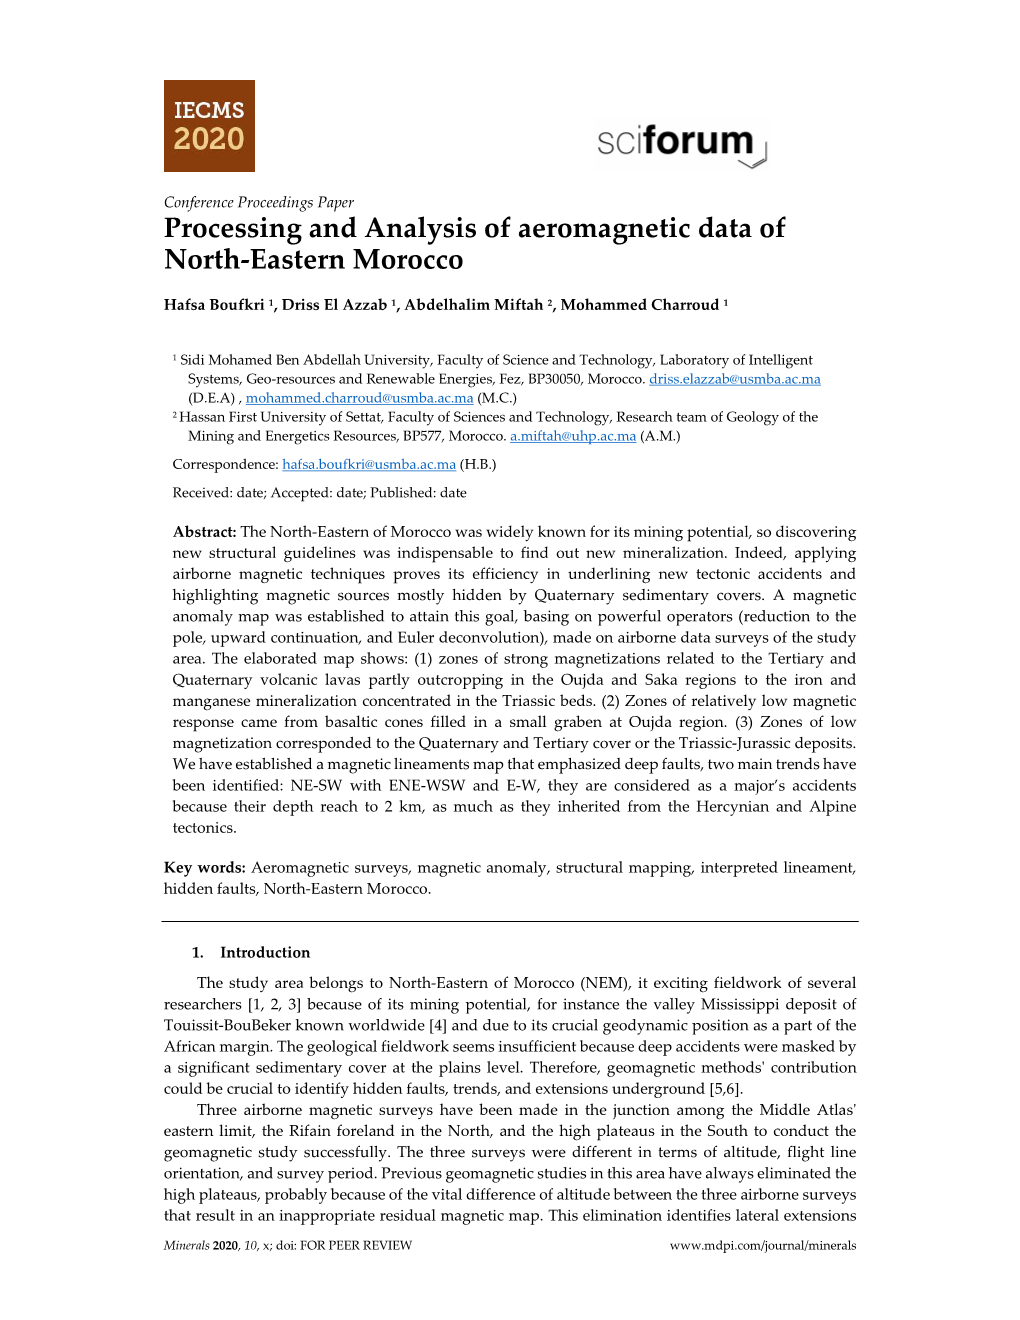 Processing and Analysis of Aeromagnetic Data of North-Eastern Morocco